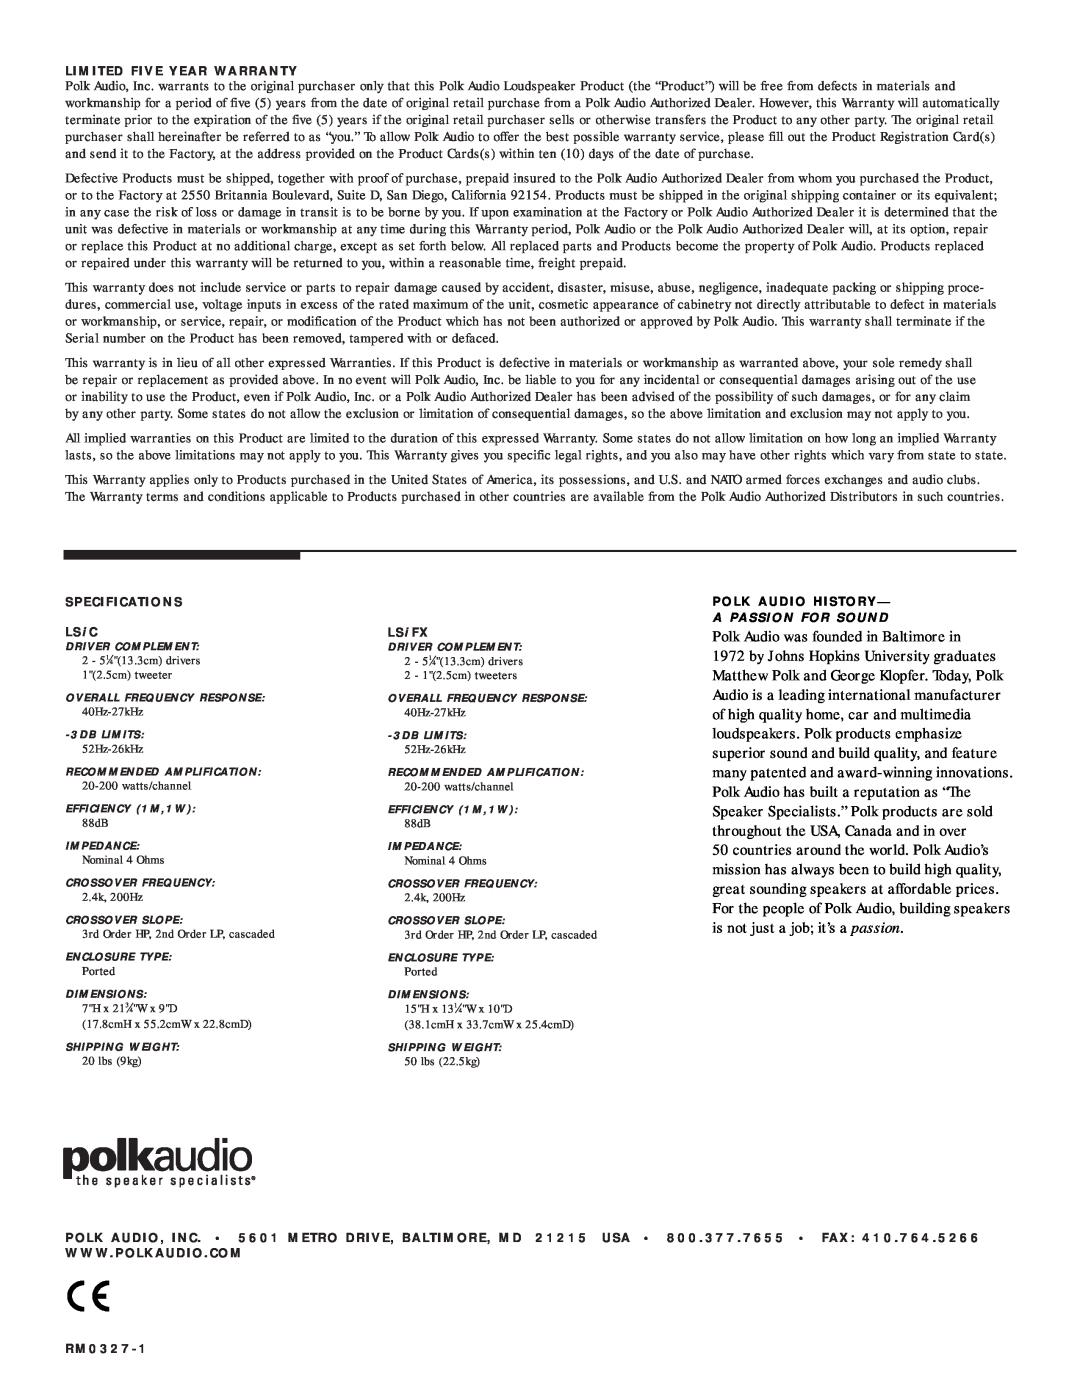 Polk Audio FX owner manual Polk Audio was founded in Baltimore in 